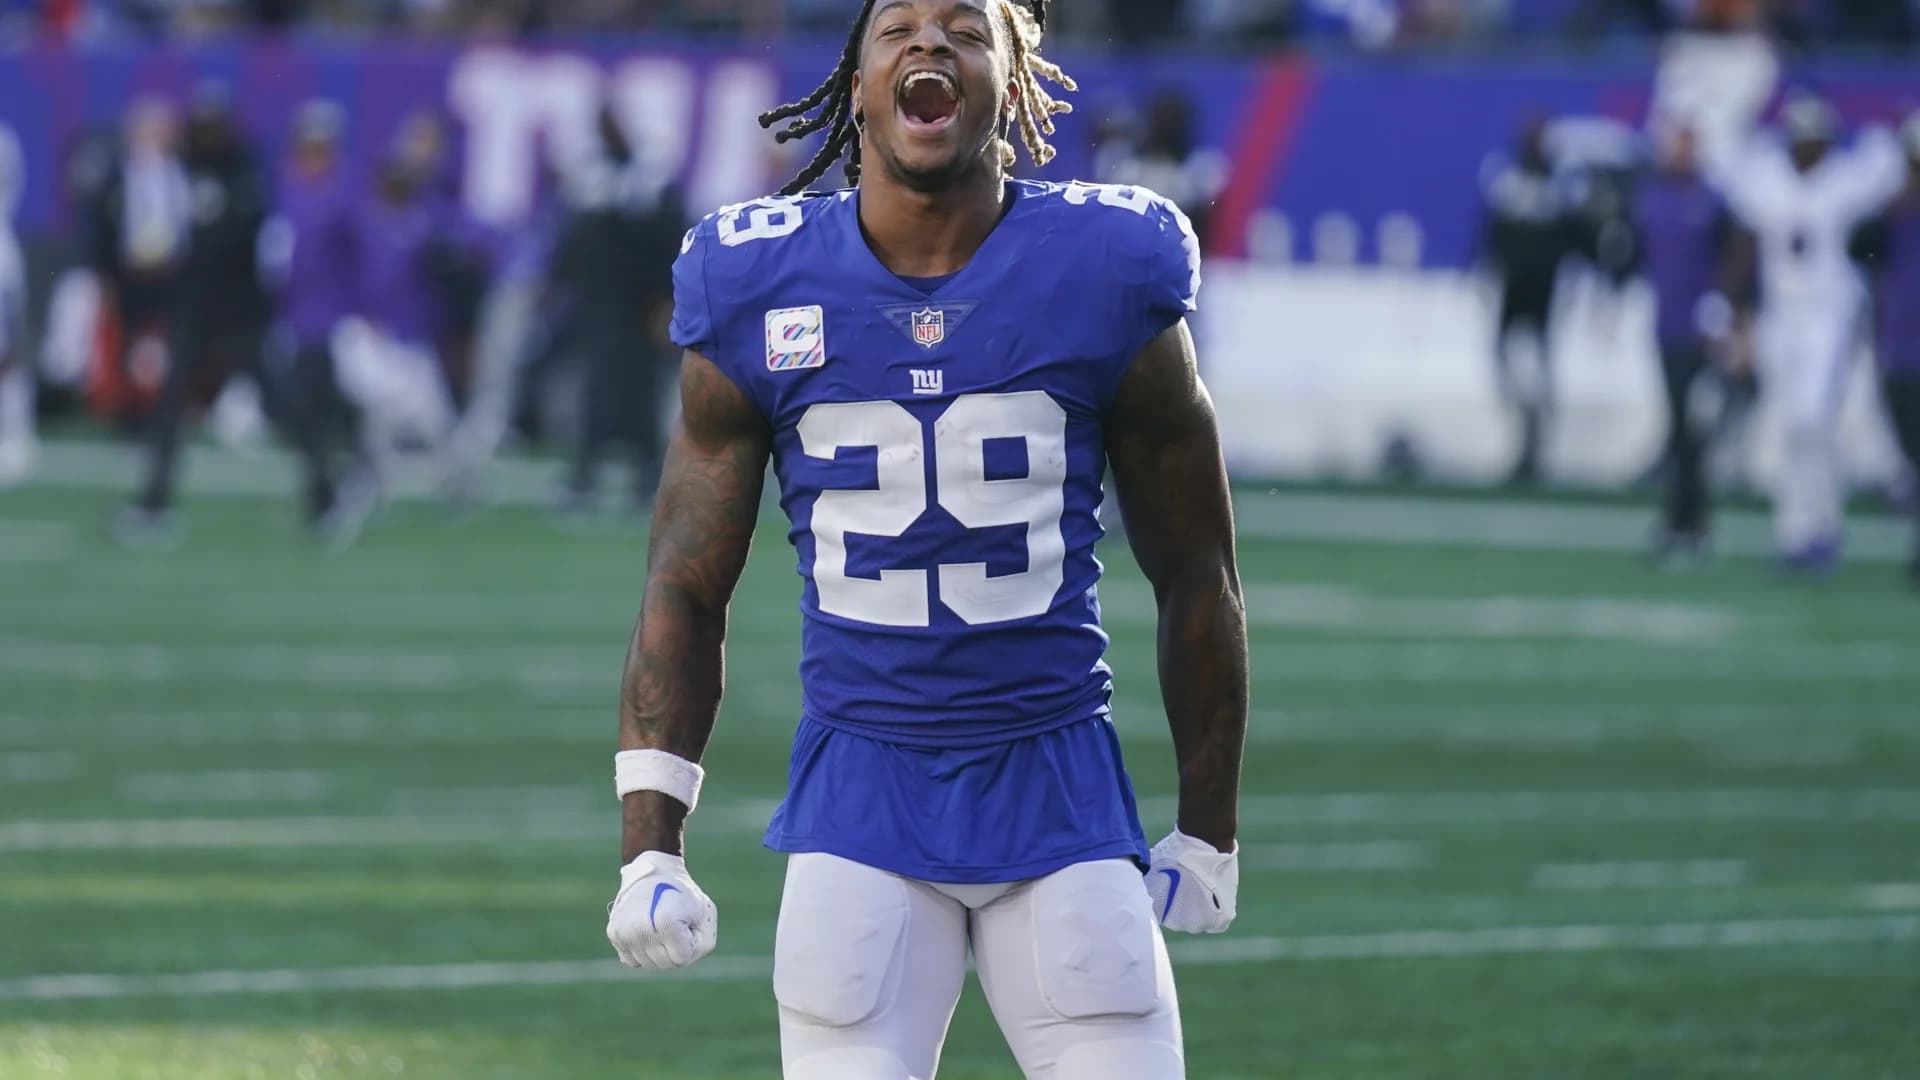 Giants safety McKinney injures hand in ATV accident, will miss 'a few weeks'